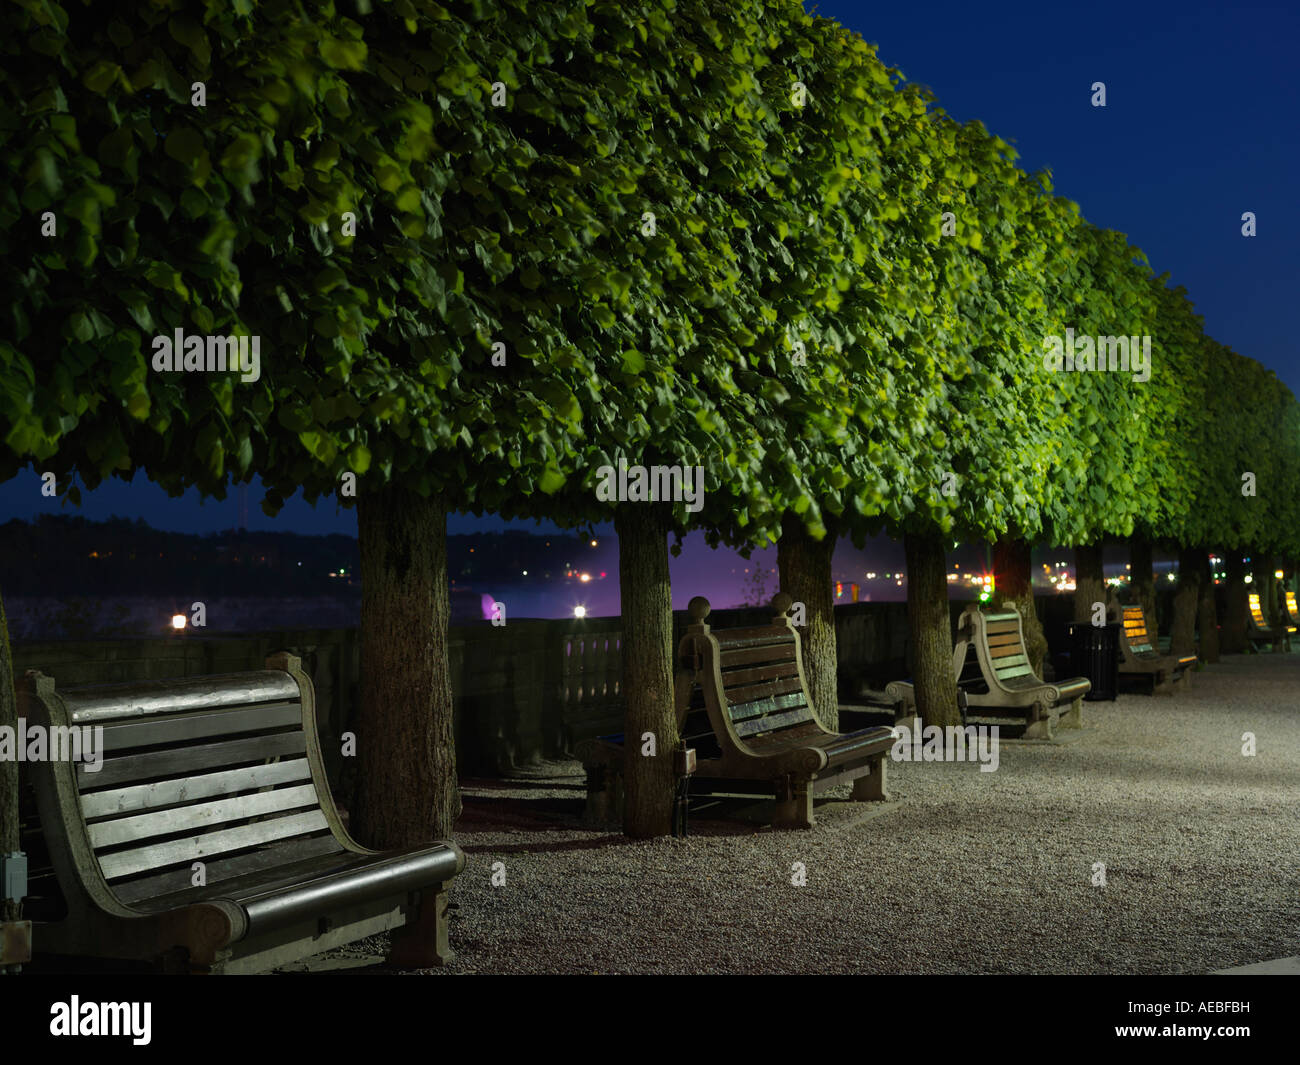 Canada Ontario Niagara Falls Niagara Parks Commission Queen Victoria Park empty benches under trees in a park setting at night Stock Photo